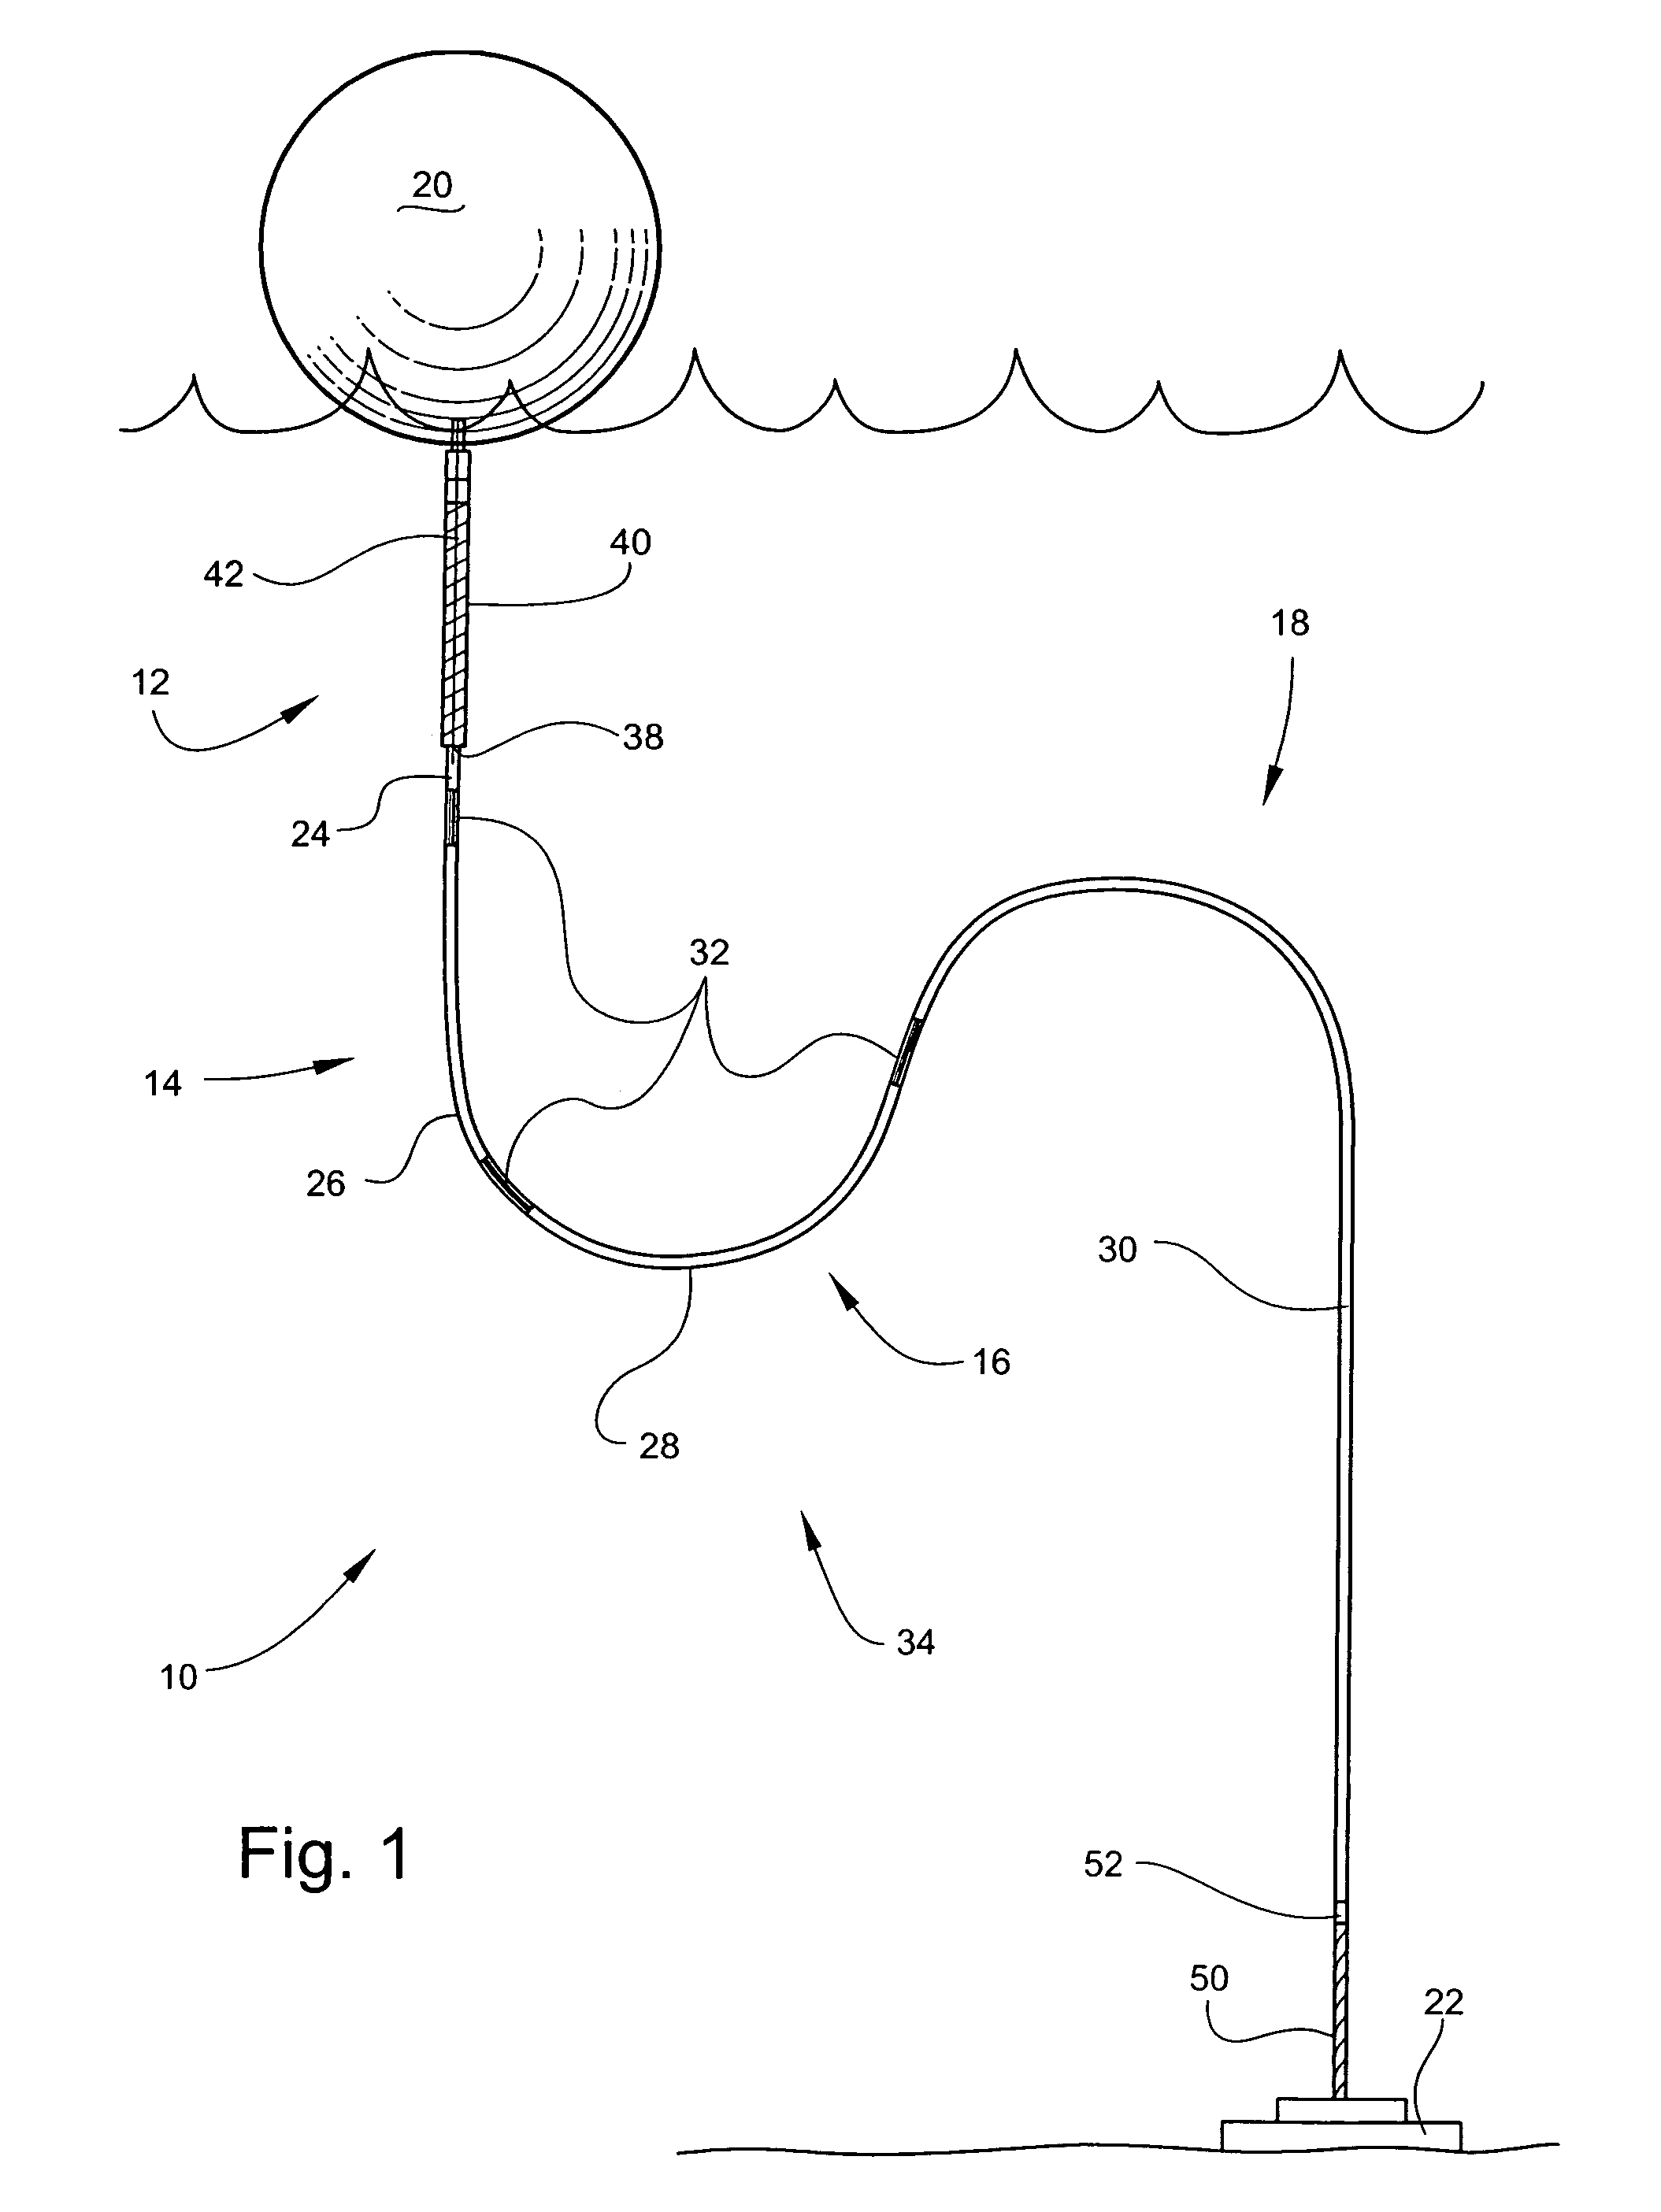 Mooring line for an oceanographic buoy system